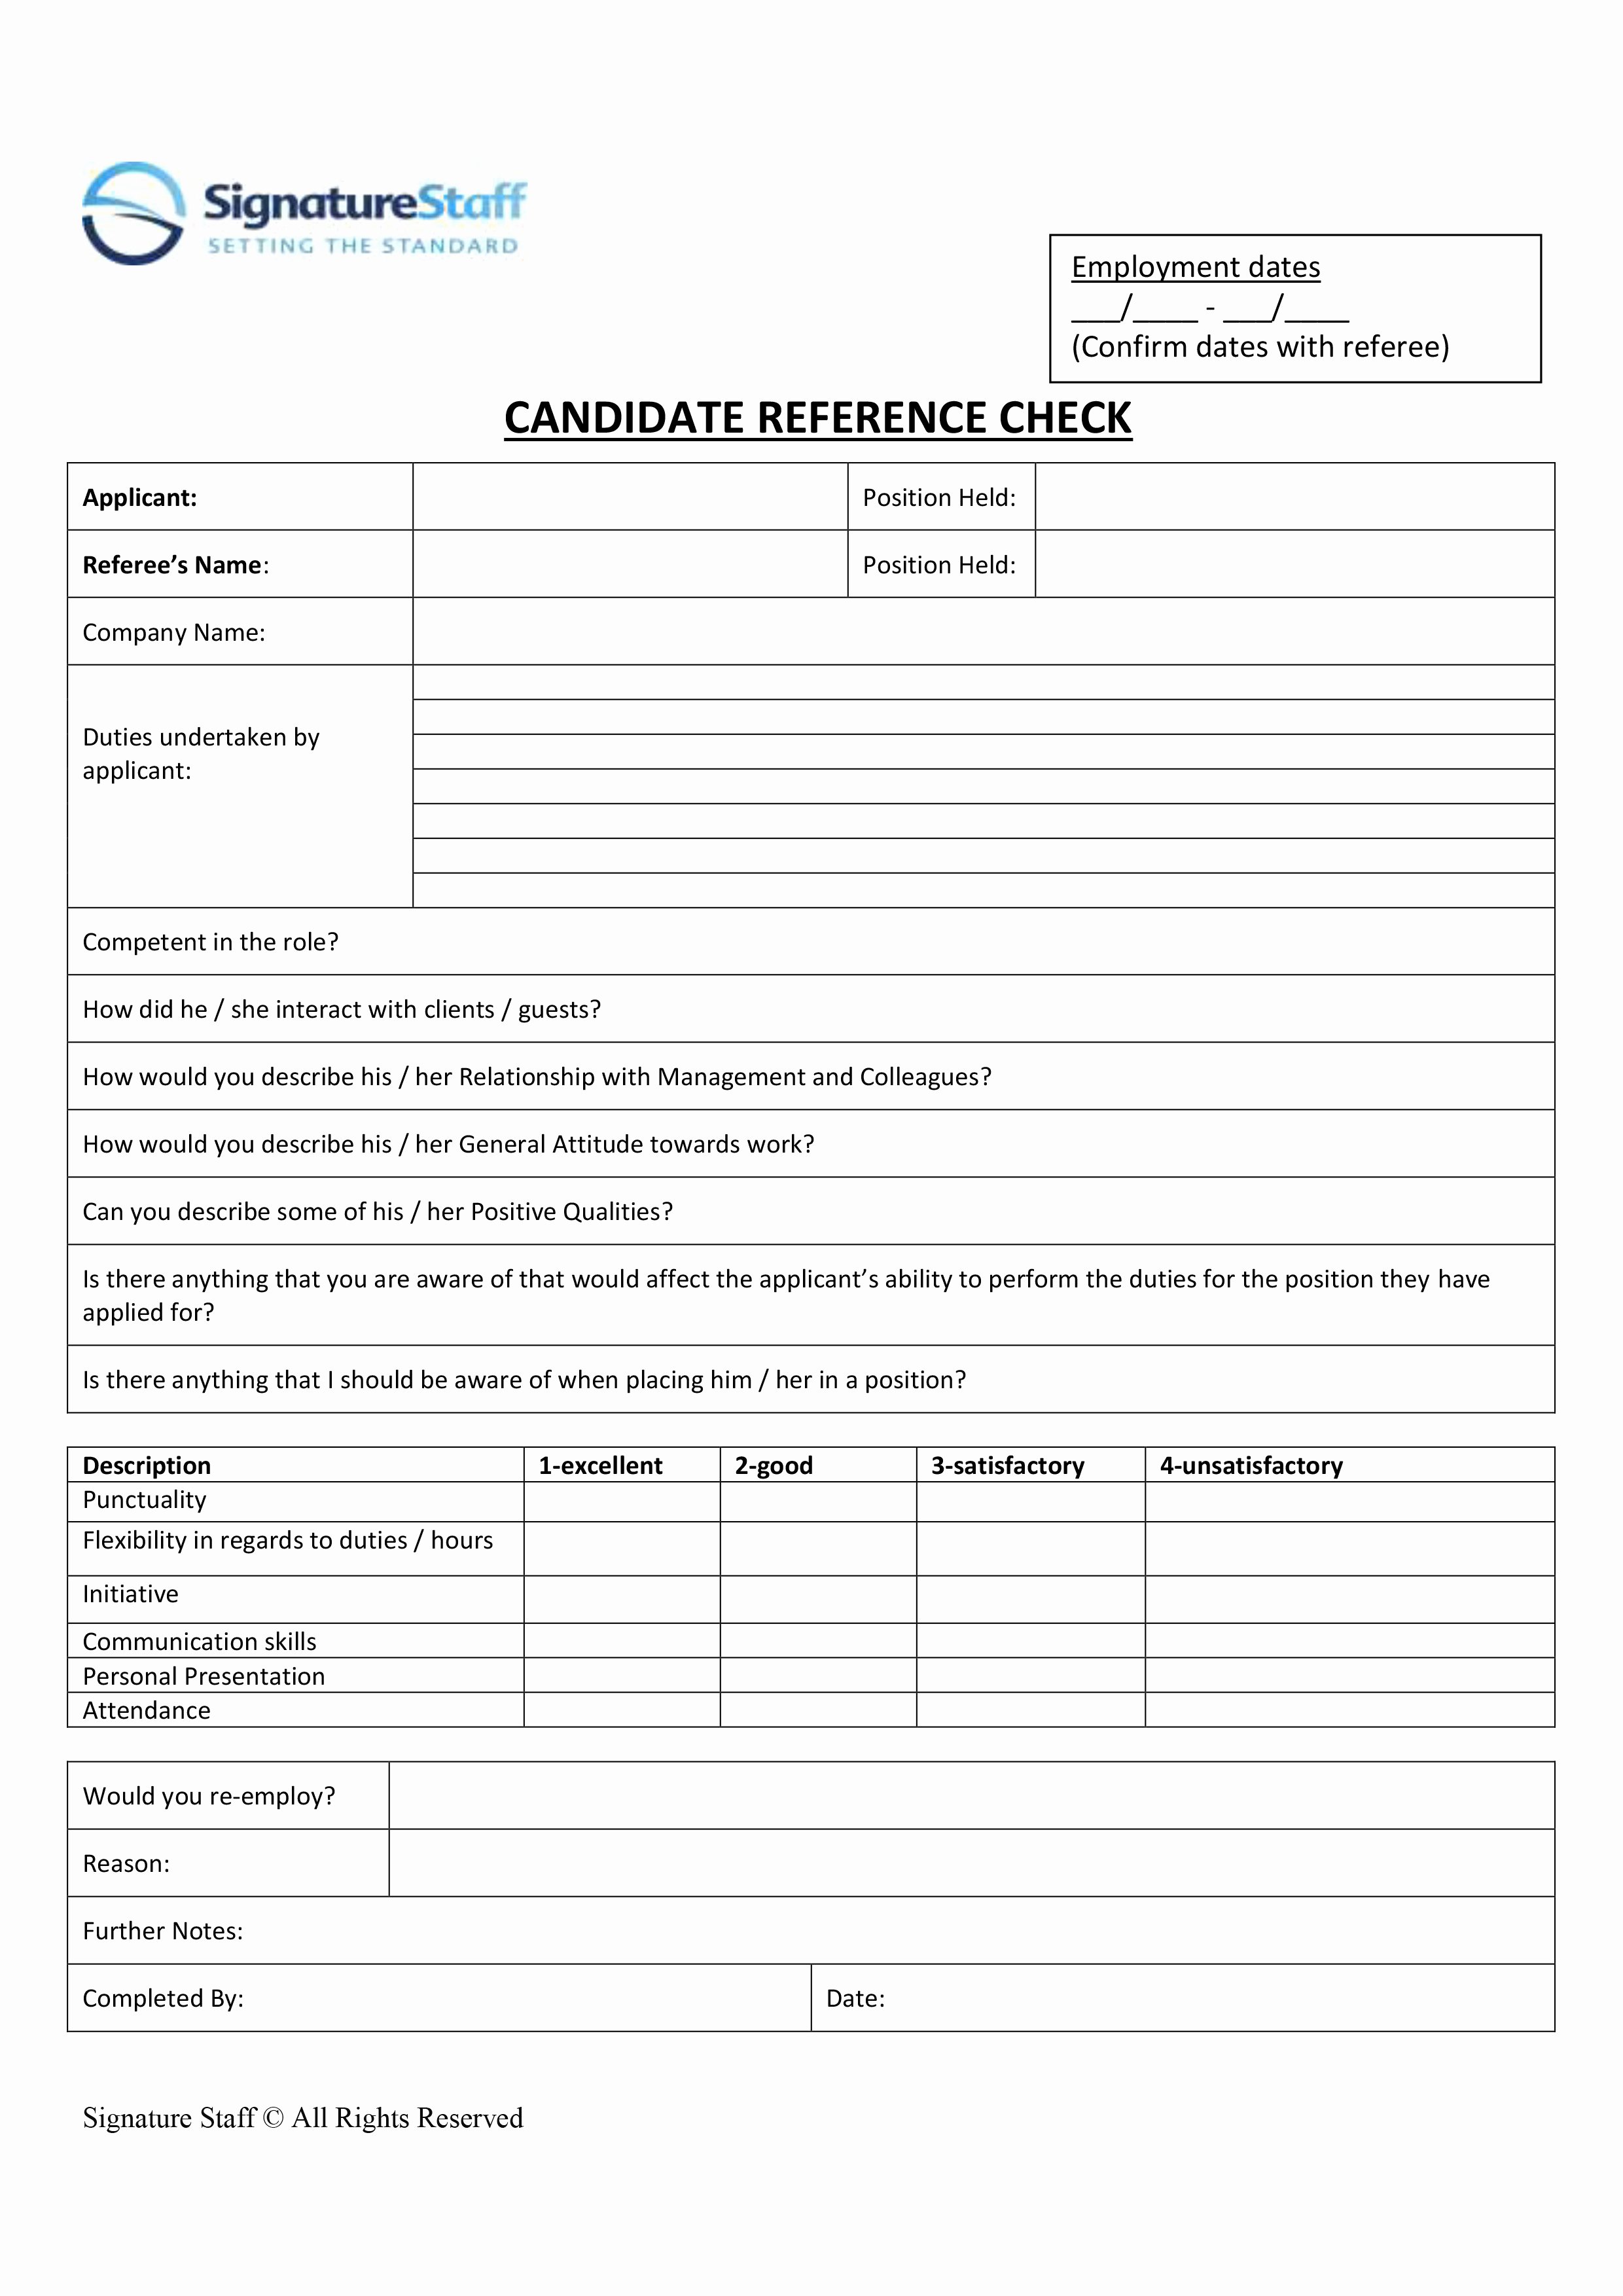 Reference Check form Template Fresh Reference Check Template Entry Level Staff Signature Staff